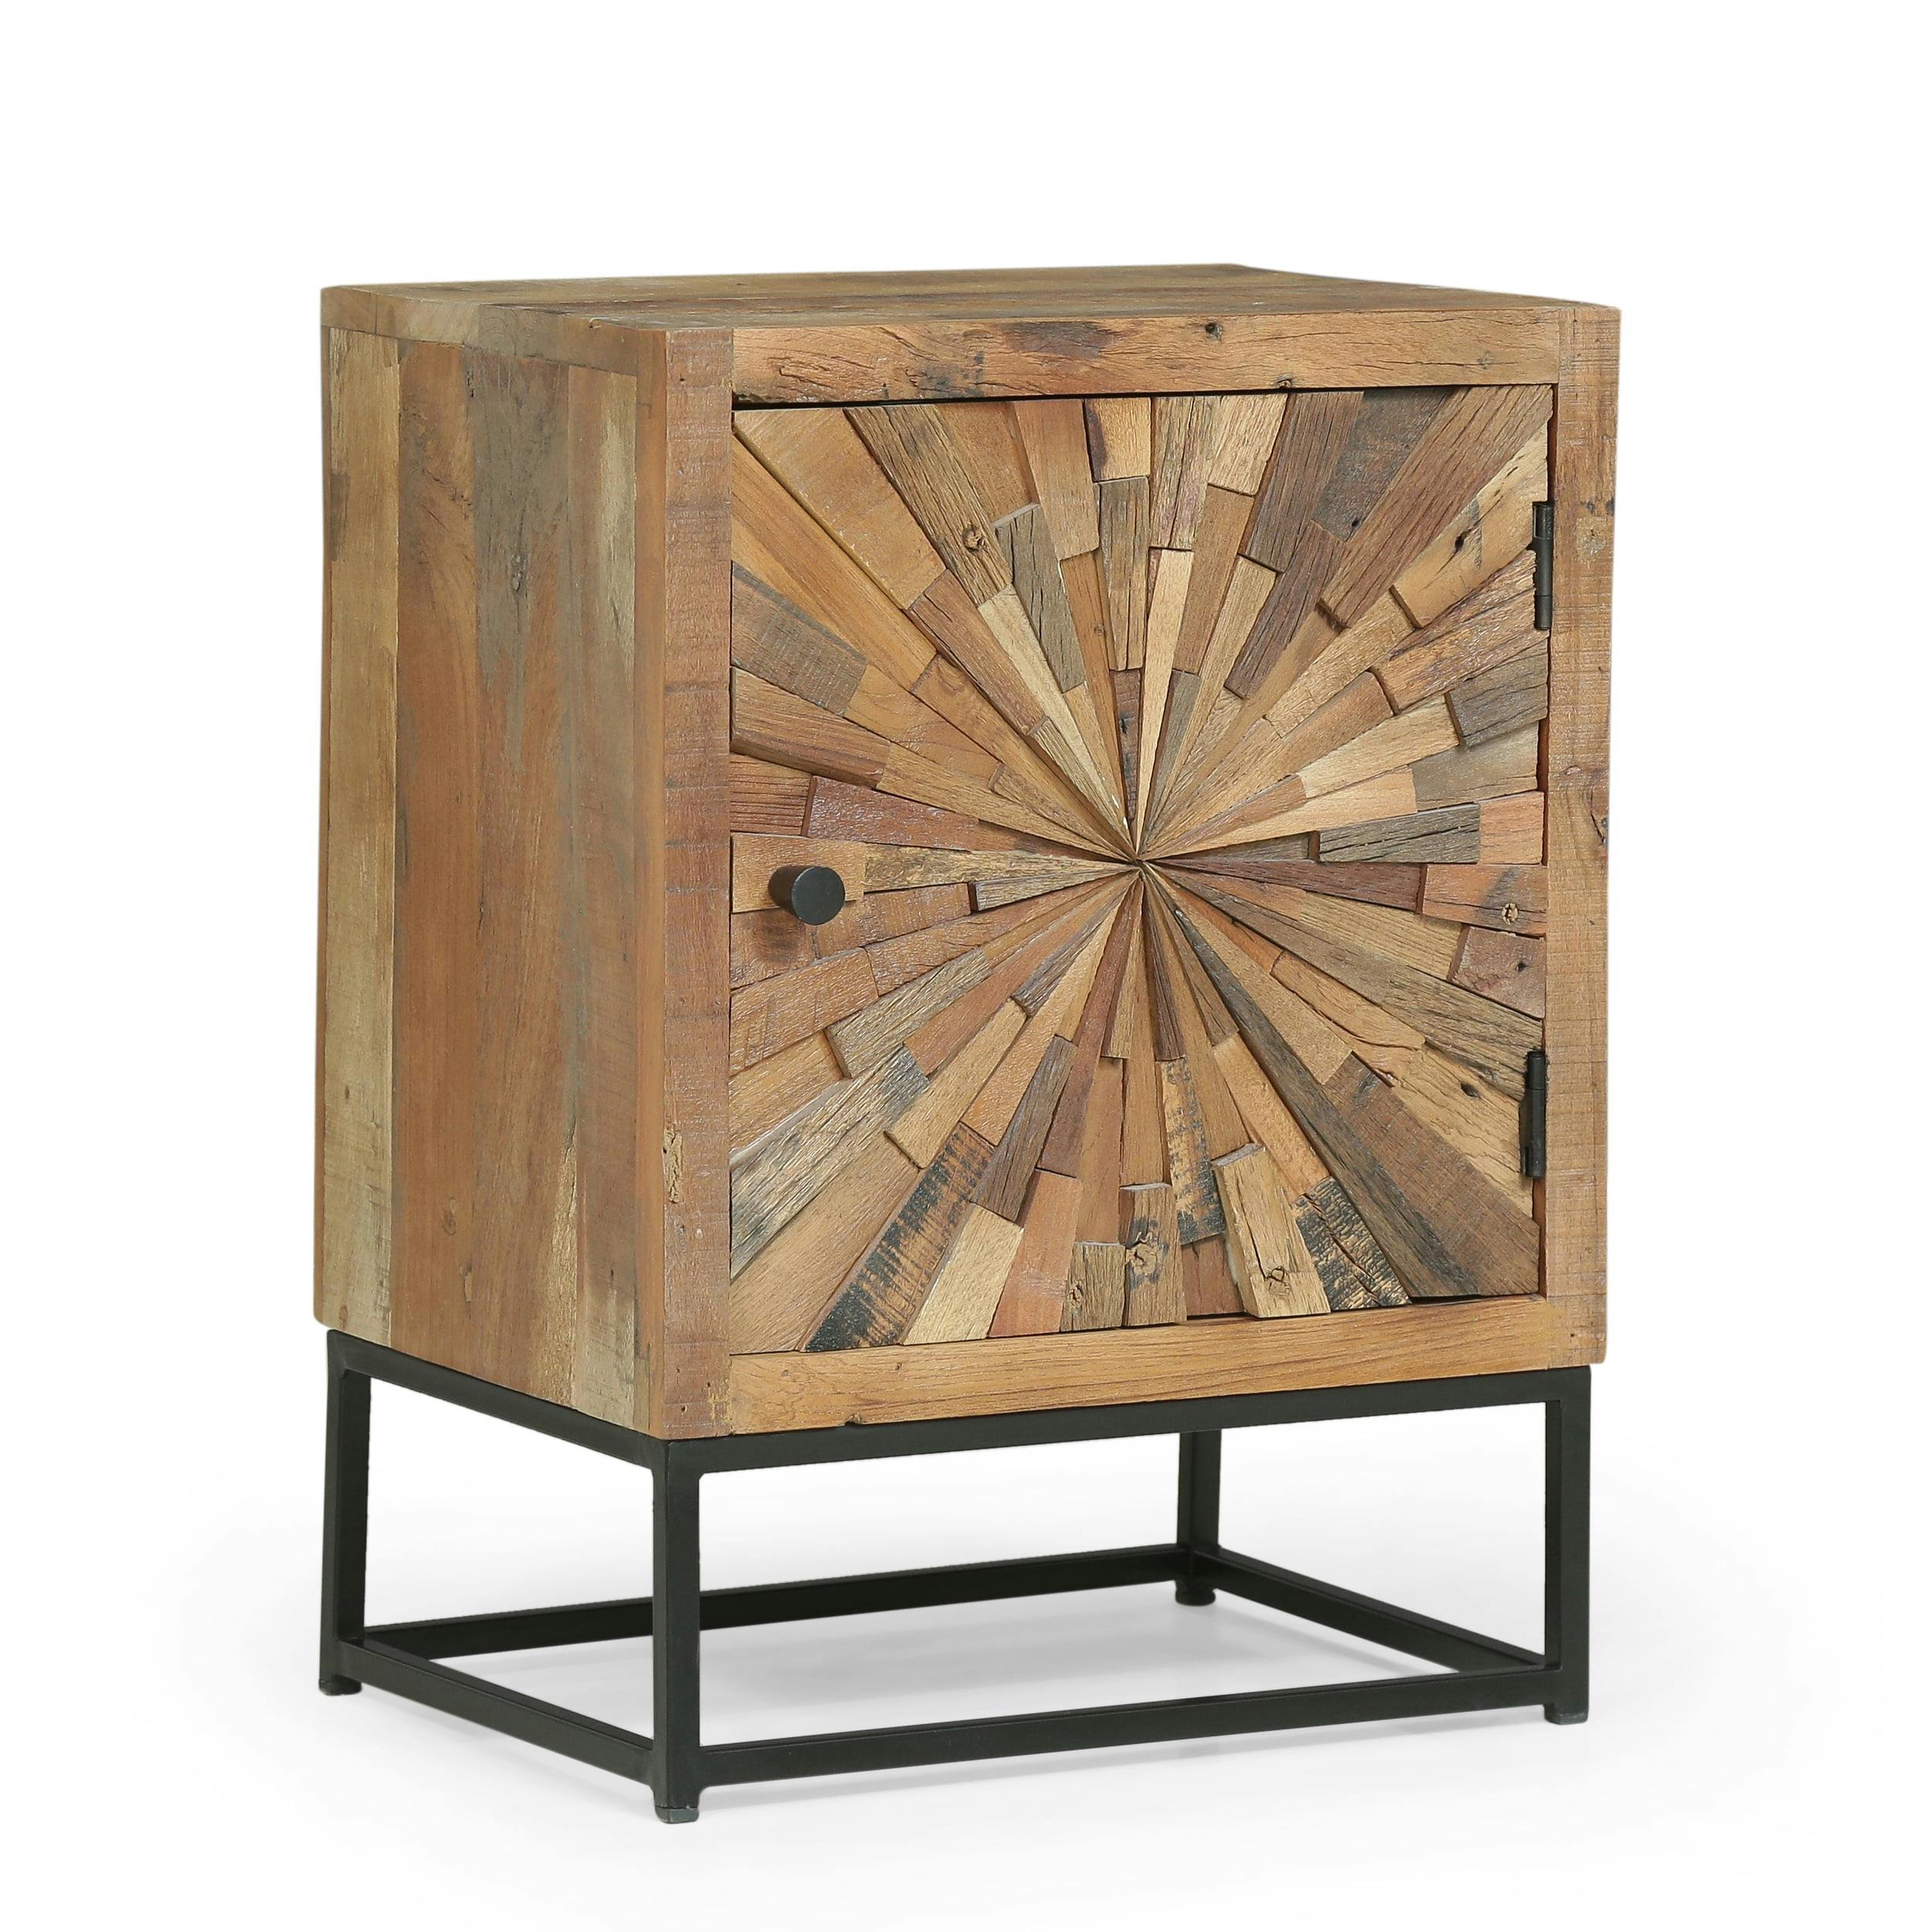 Temur Sunburst Handcrafted Wooden Night Stand in Natural Finish